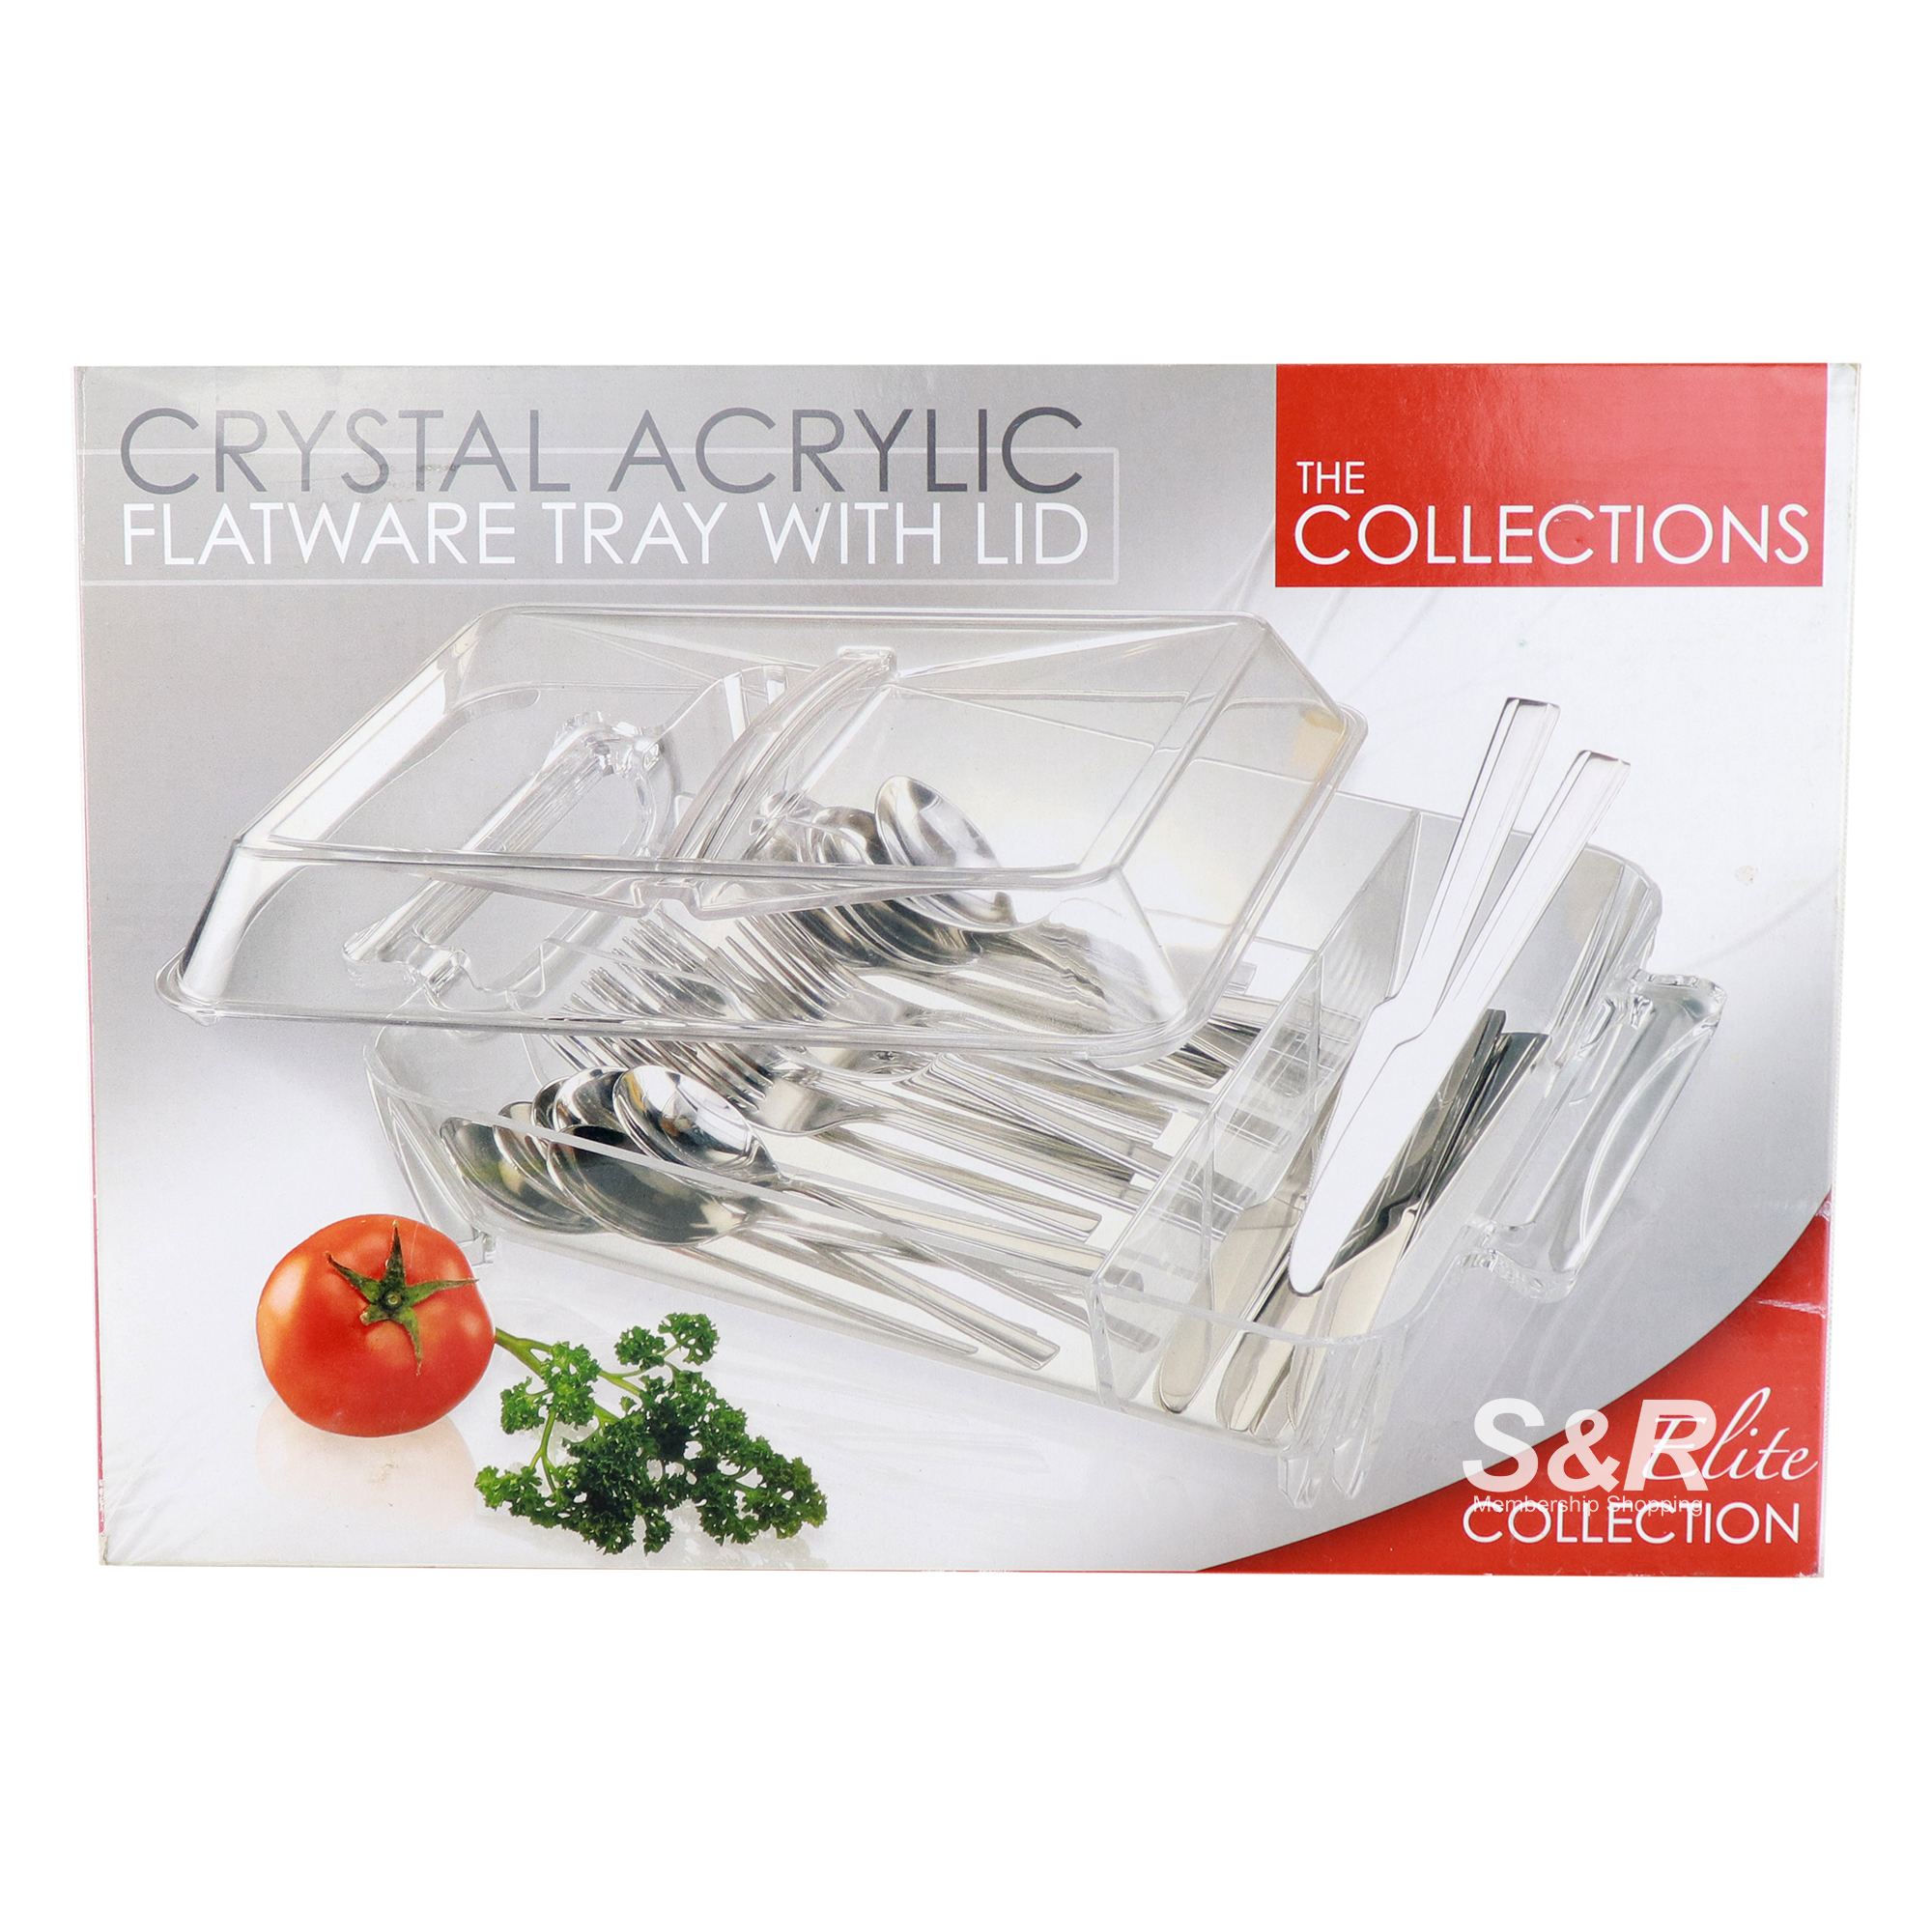 The Collections Crystal Acrylic Flatware Tray with Lid 1pc